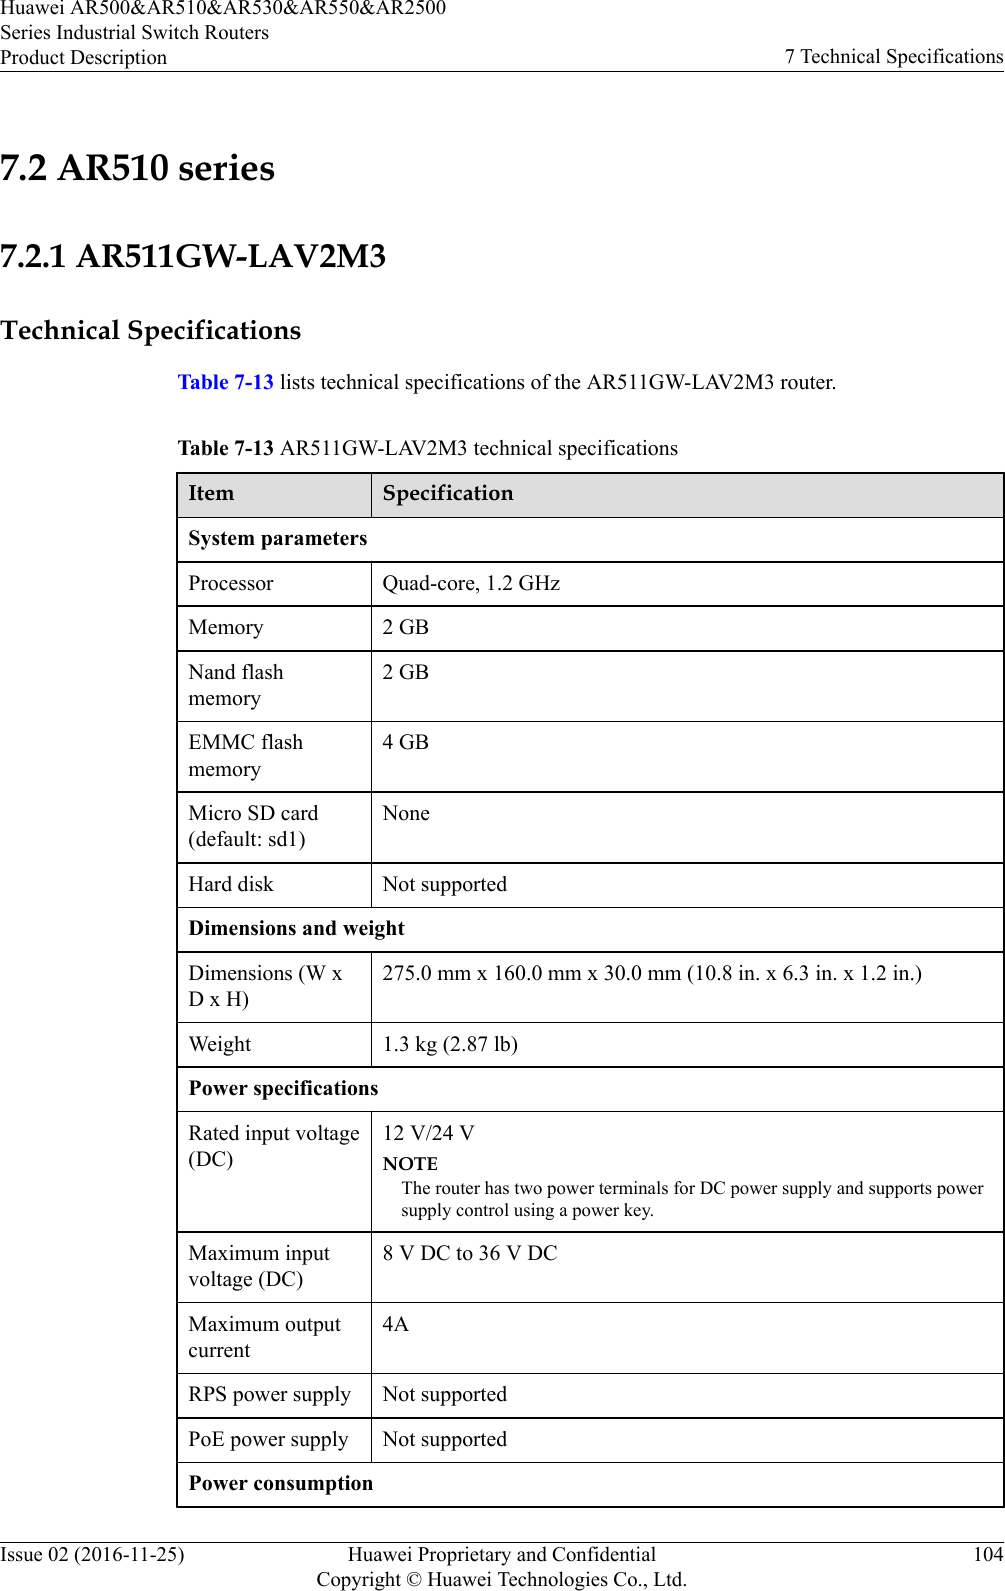 7.2 AR510 series7.2.1 AR511GW-LAV2M3Technical SpecificationsTable 7-13 lists technical specifications of the AR511GW-LAV2M3 router.Table 7-13 AR511GW-LAV2M3 technical specificationsItem SpecificationSystem parametersProcessor Quad-core, 1.2 GHzMemory 2 GBNand flashmemory2 GBEMMC flashmemory4 GBMicro SD card(default: sd1)NoneHard disk Not supportedDimensions and weightDimensions (W xD x H)275.0 mm x 160.0 mm x 30.0 mm (10.8 in. x 6.3 in. x 1.2 in.)Weight 1.3 kg (2.87 lb)Power specificationsRated input voltage(DC)12 V/24 VNOTEThe router has two power terminals for DC power supply and supports powersupply control using a power key.Maximum inputvoltage (DC)8 V DC to 36 V DCMaximum outputcurrent4ARPS power supply Not supportedPoE power supply Not supportedPower consumptionHuawei AR500&amp;AR510&amp;AR530&amp;AR550&amp;AR2500Series Industrial Switch RoutersProduct Description 7 Technical SpecificationsIssue 02 (2016-11-25) Huawei Proprietary and ConfidentialCopyright © Huawei Technologies Co., Ltd.104